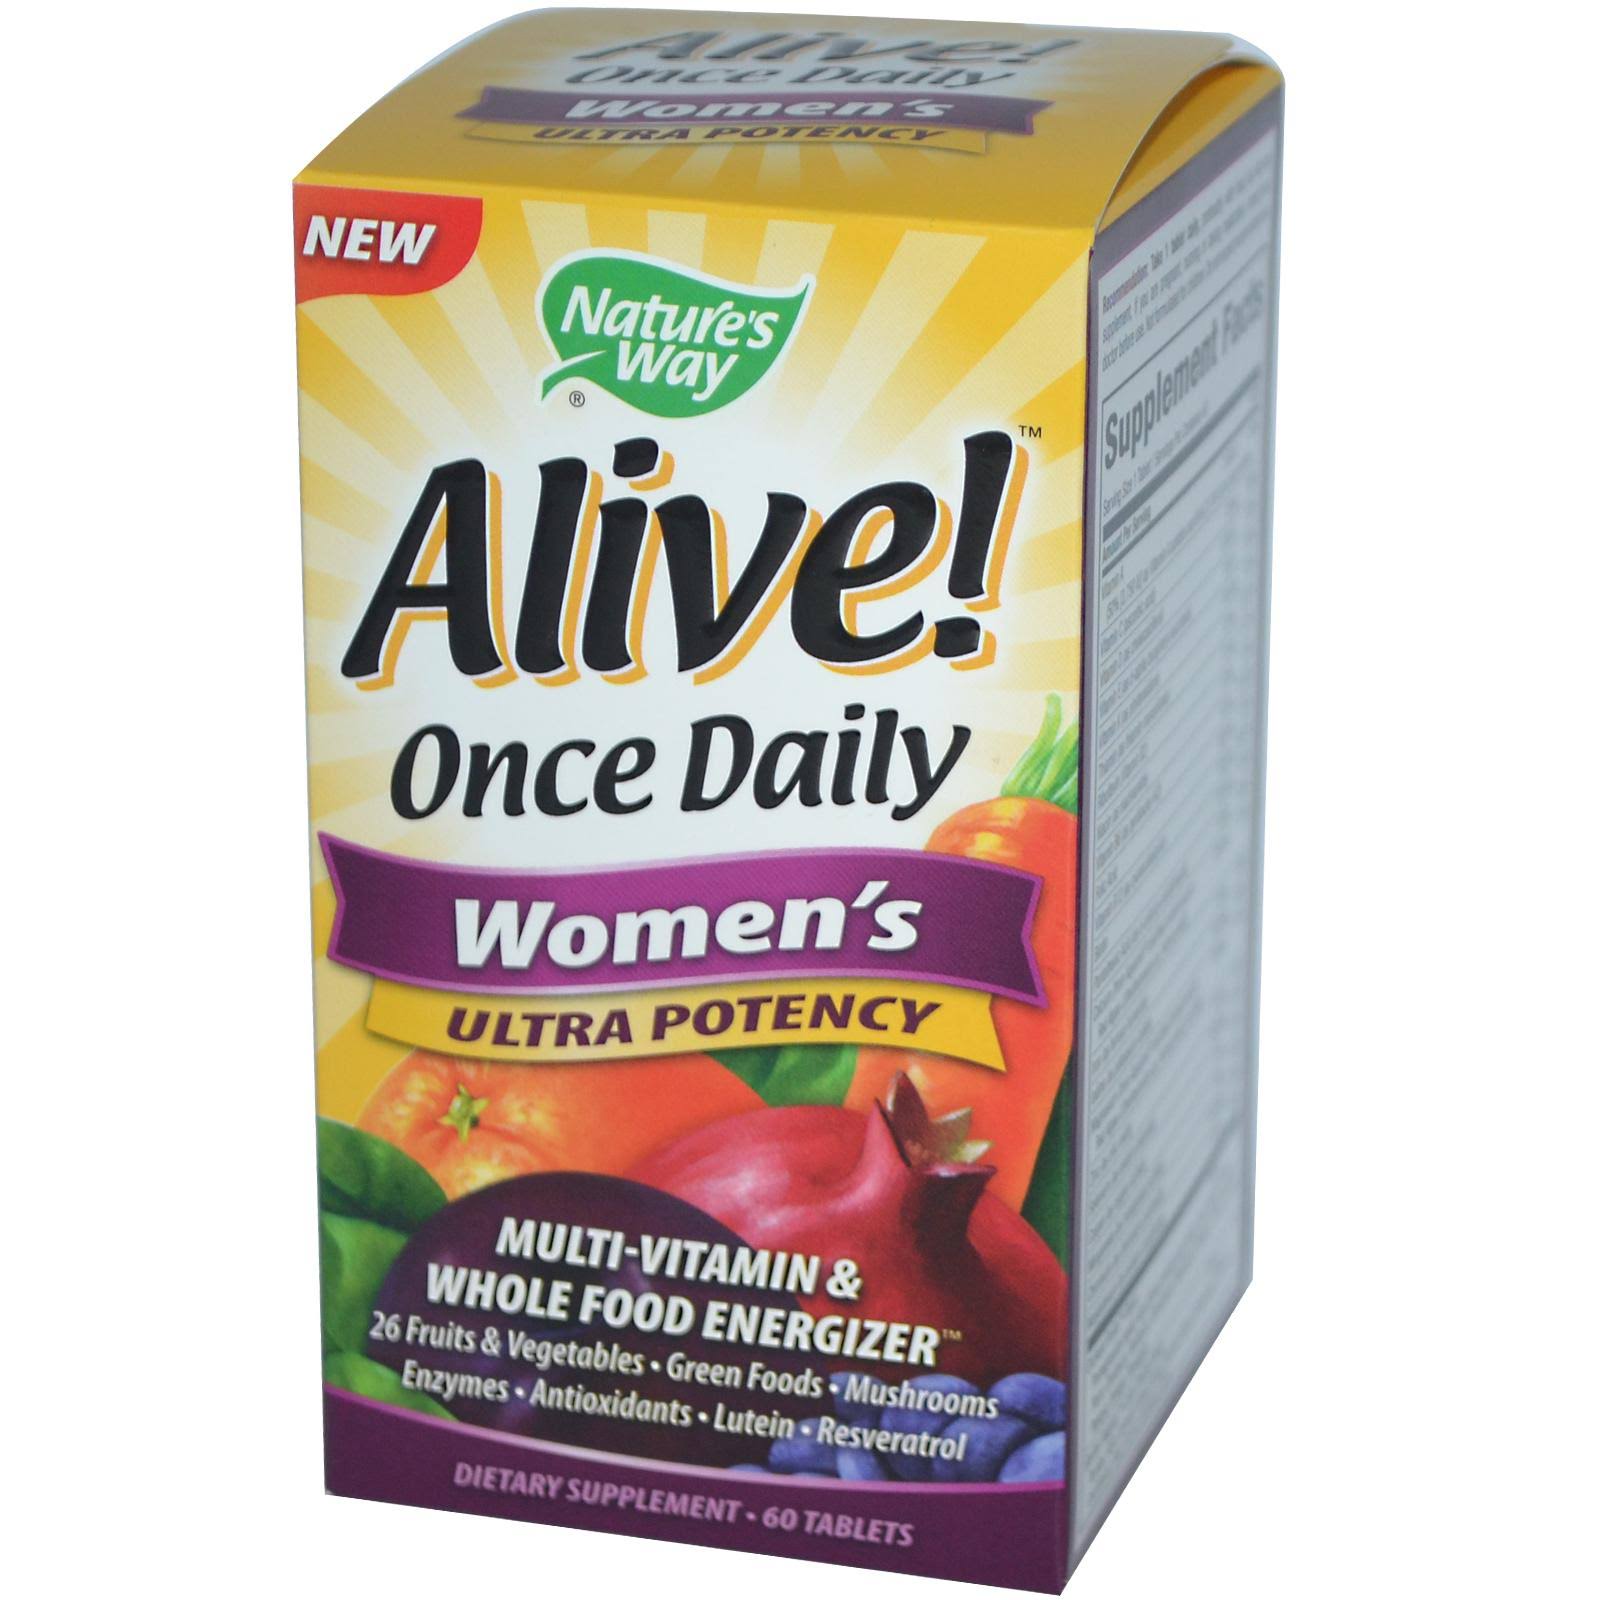 Nature's Way Alive Once Daily Women’s Ultra Potency Multi-Vitamin - 60 Tablets